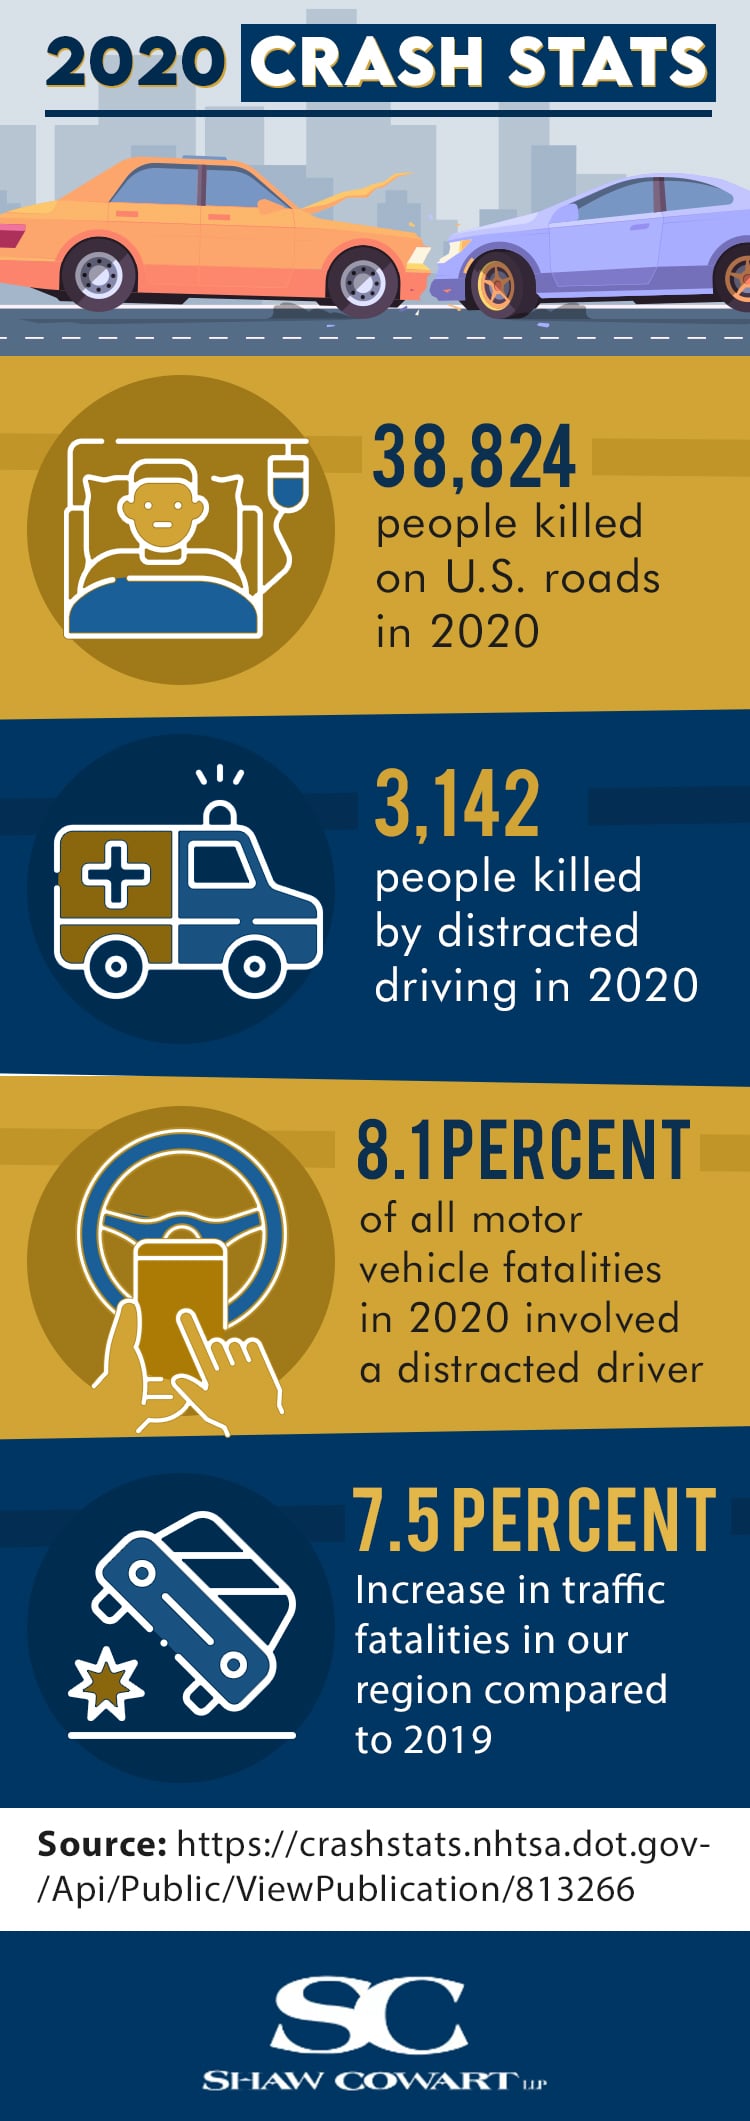 An infographic showing 2020 motor vehicle accident statistics